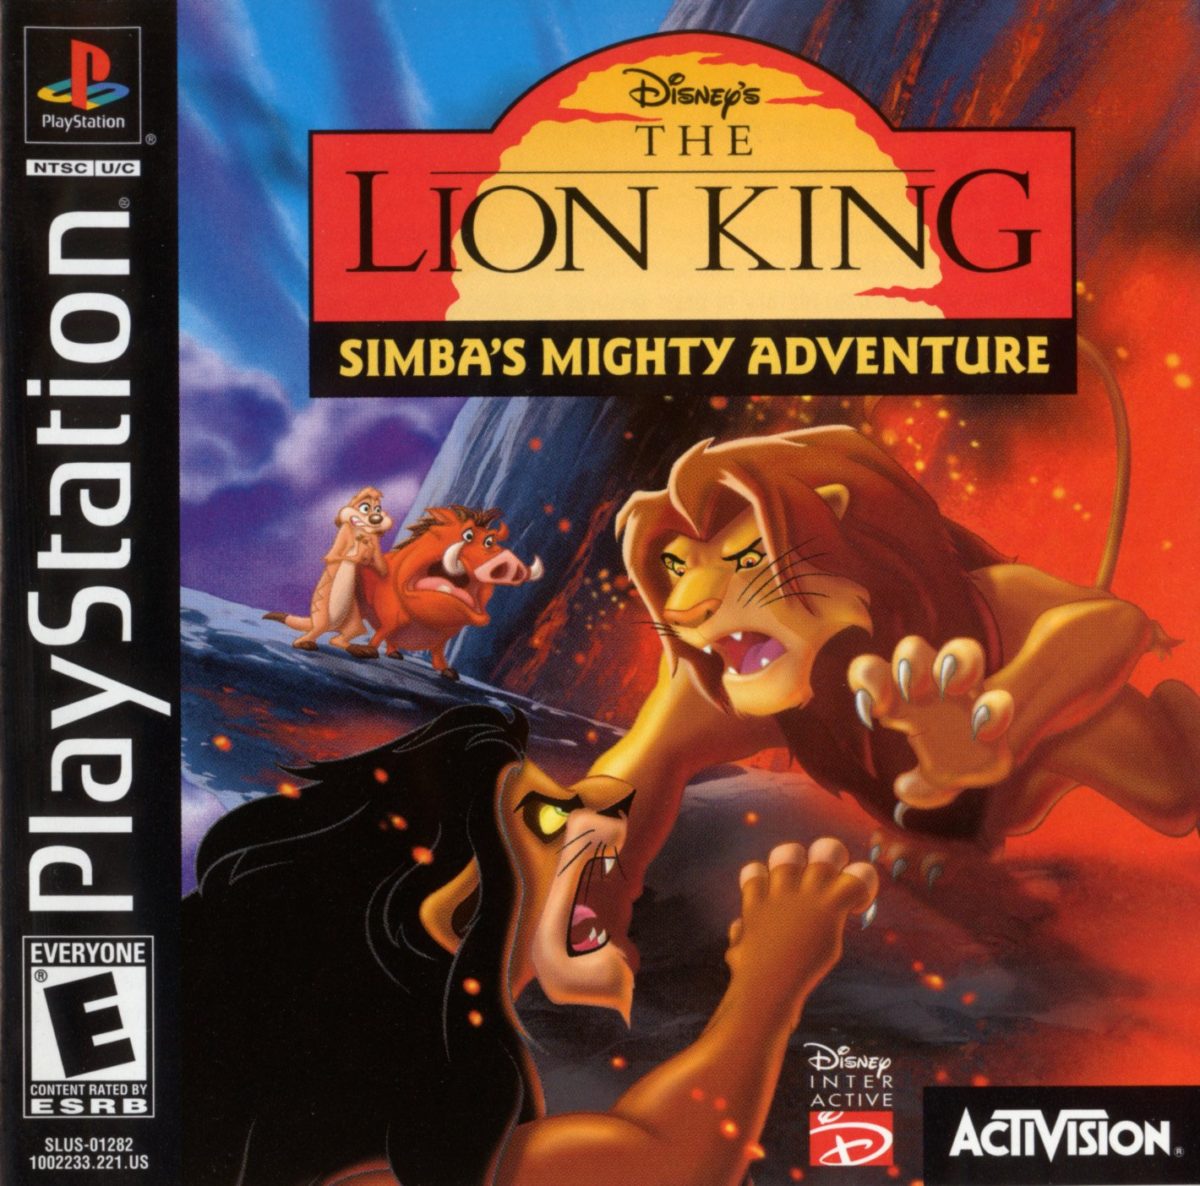 The Lion King: Simba’s Mighty Adventure player count stats